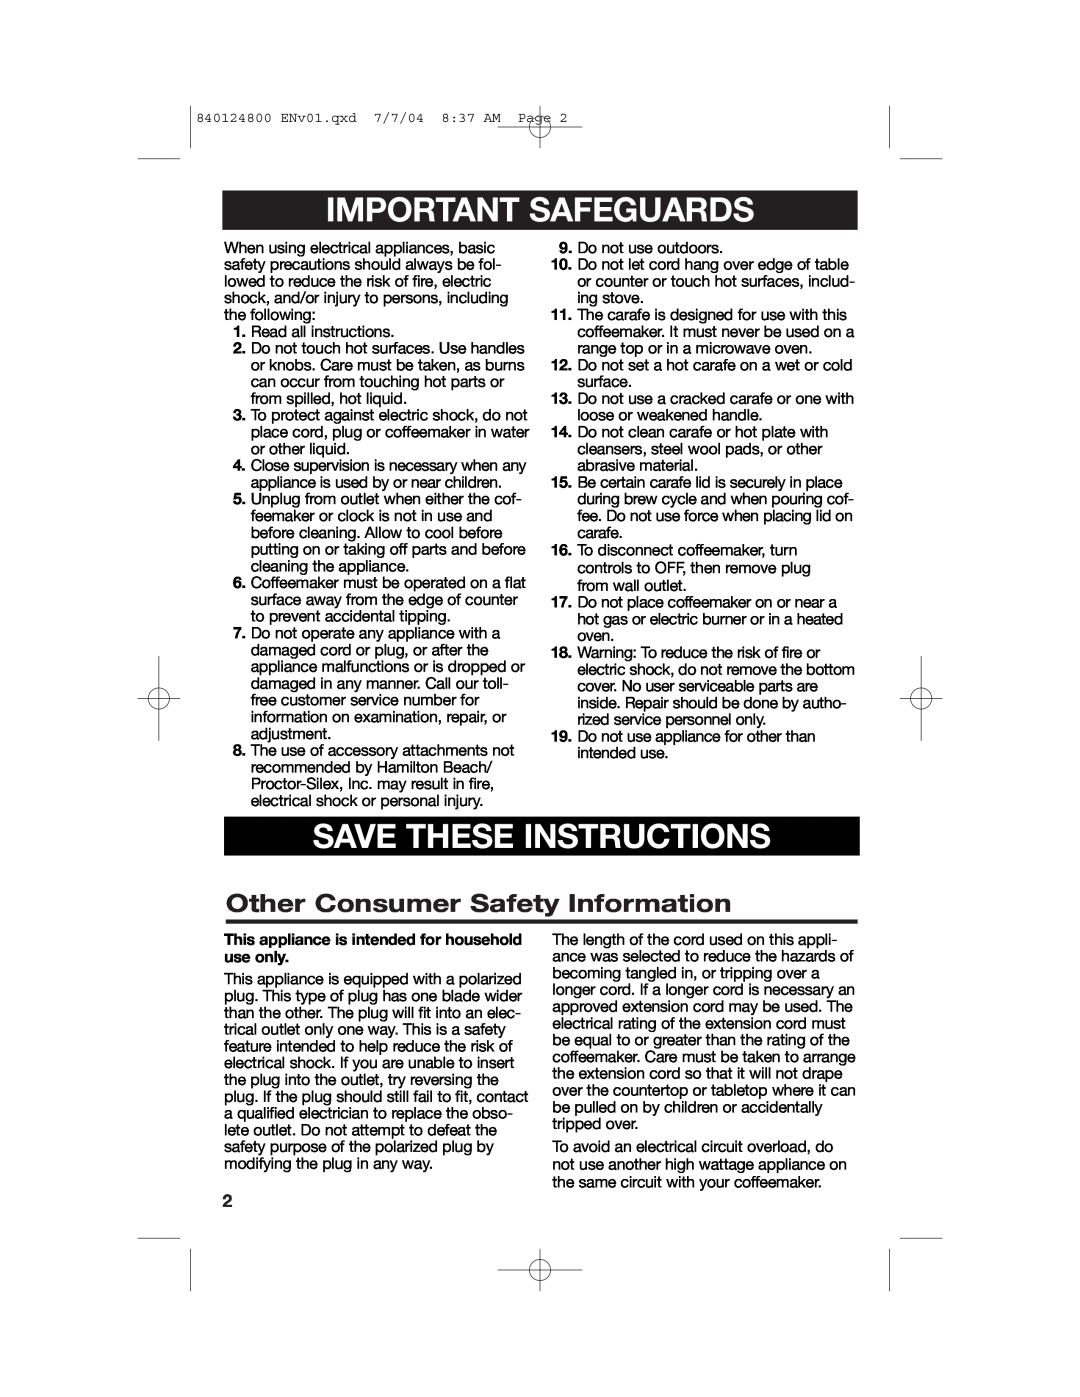 Hamilton Beach 46924 manual Important Safeguards, Save These Instructions, Other Consumer Safety Information 